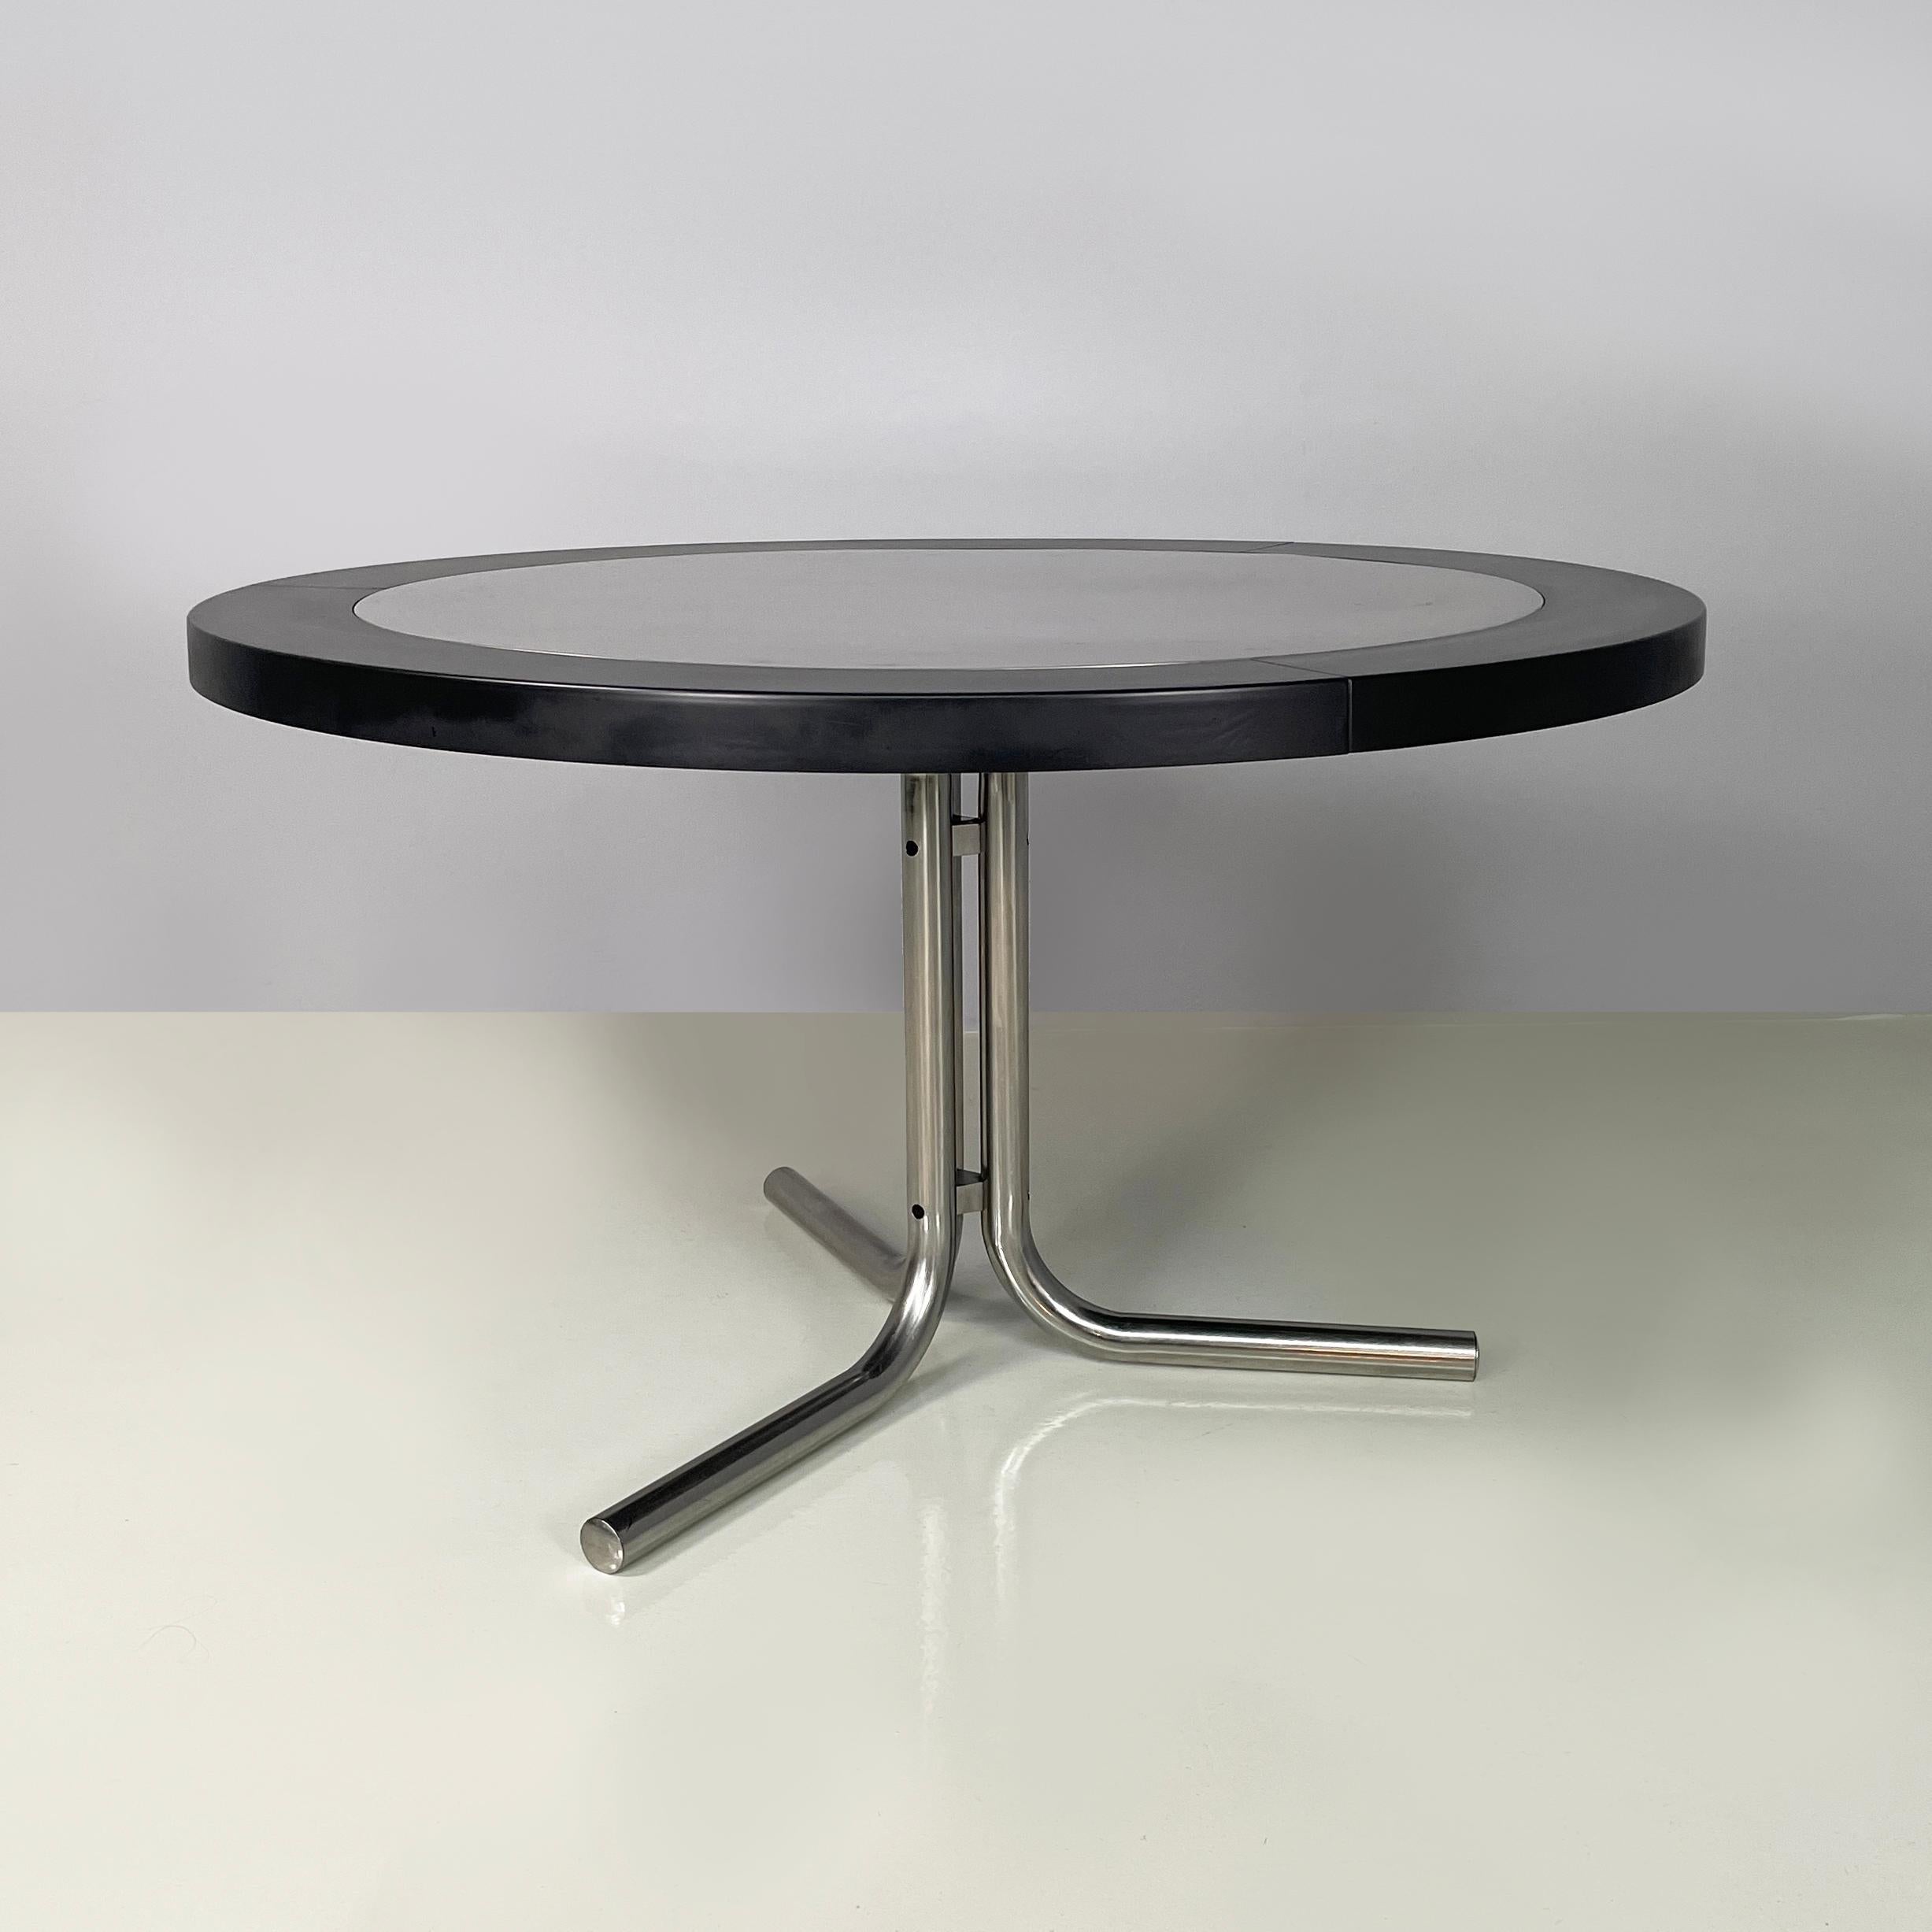 Italian modern Dining table Desco  by Achille Castiglioni for Zanotta, 1970s
Dining table mod. Desco with round top in satin steel with black plastic profile. The 3-spoke leg is made of metal tubing.
Produced by Zanotta in 1970s and designed by